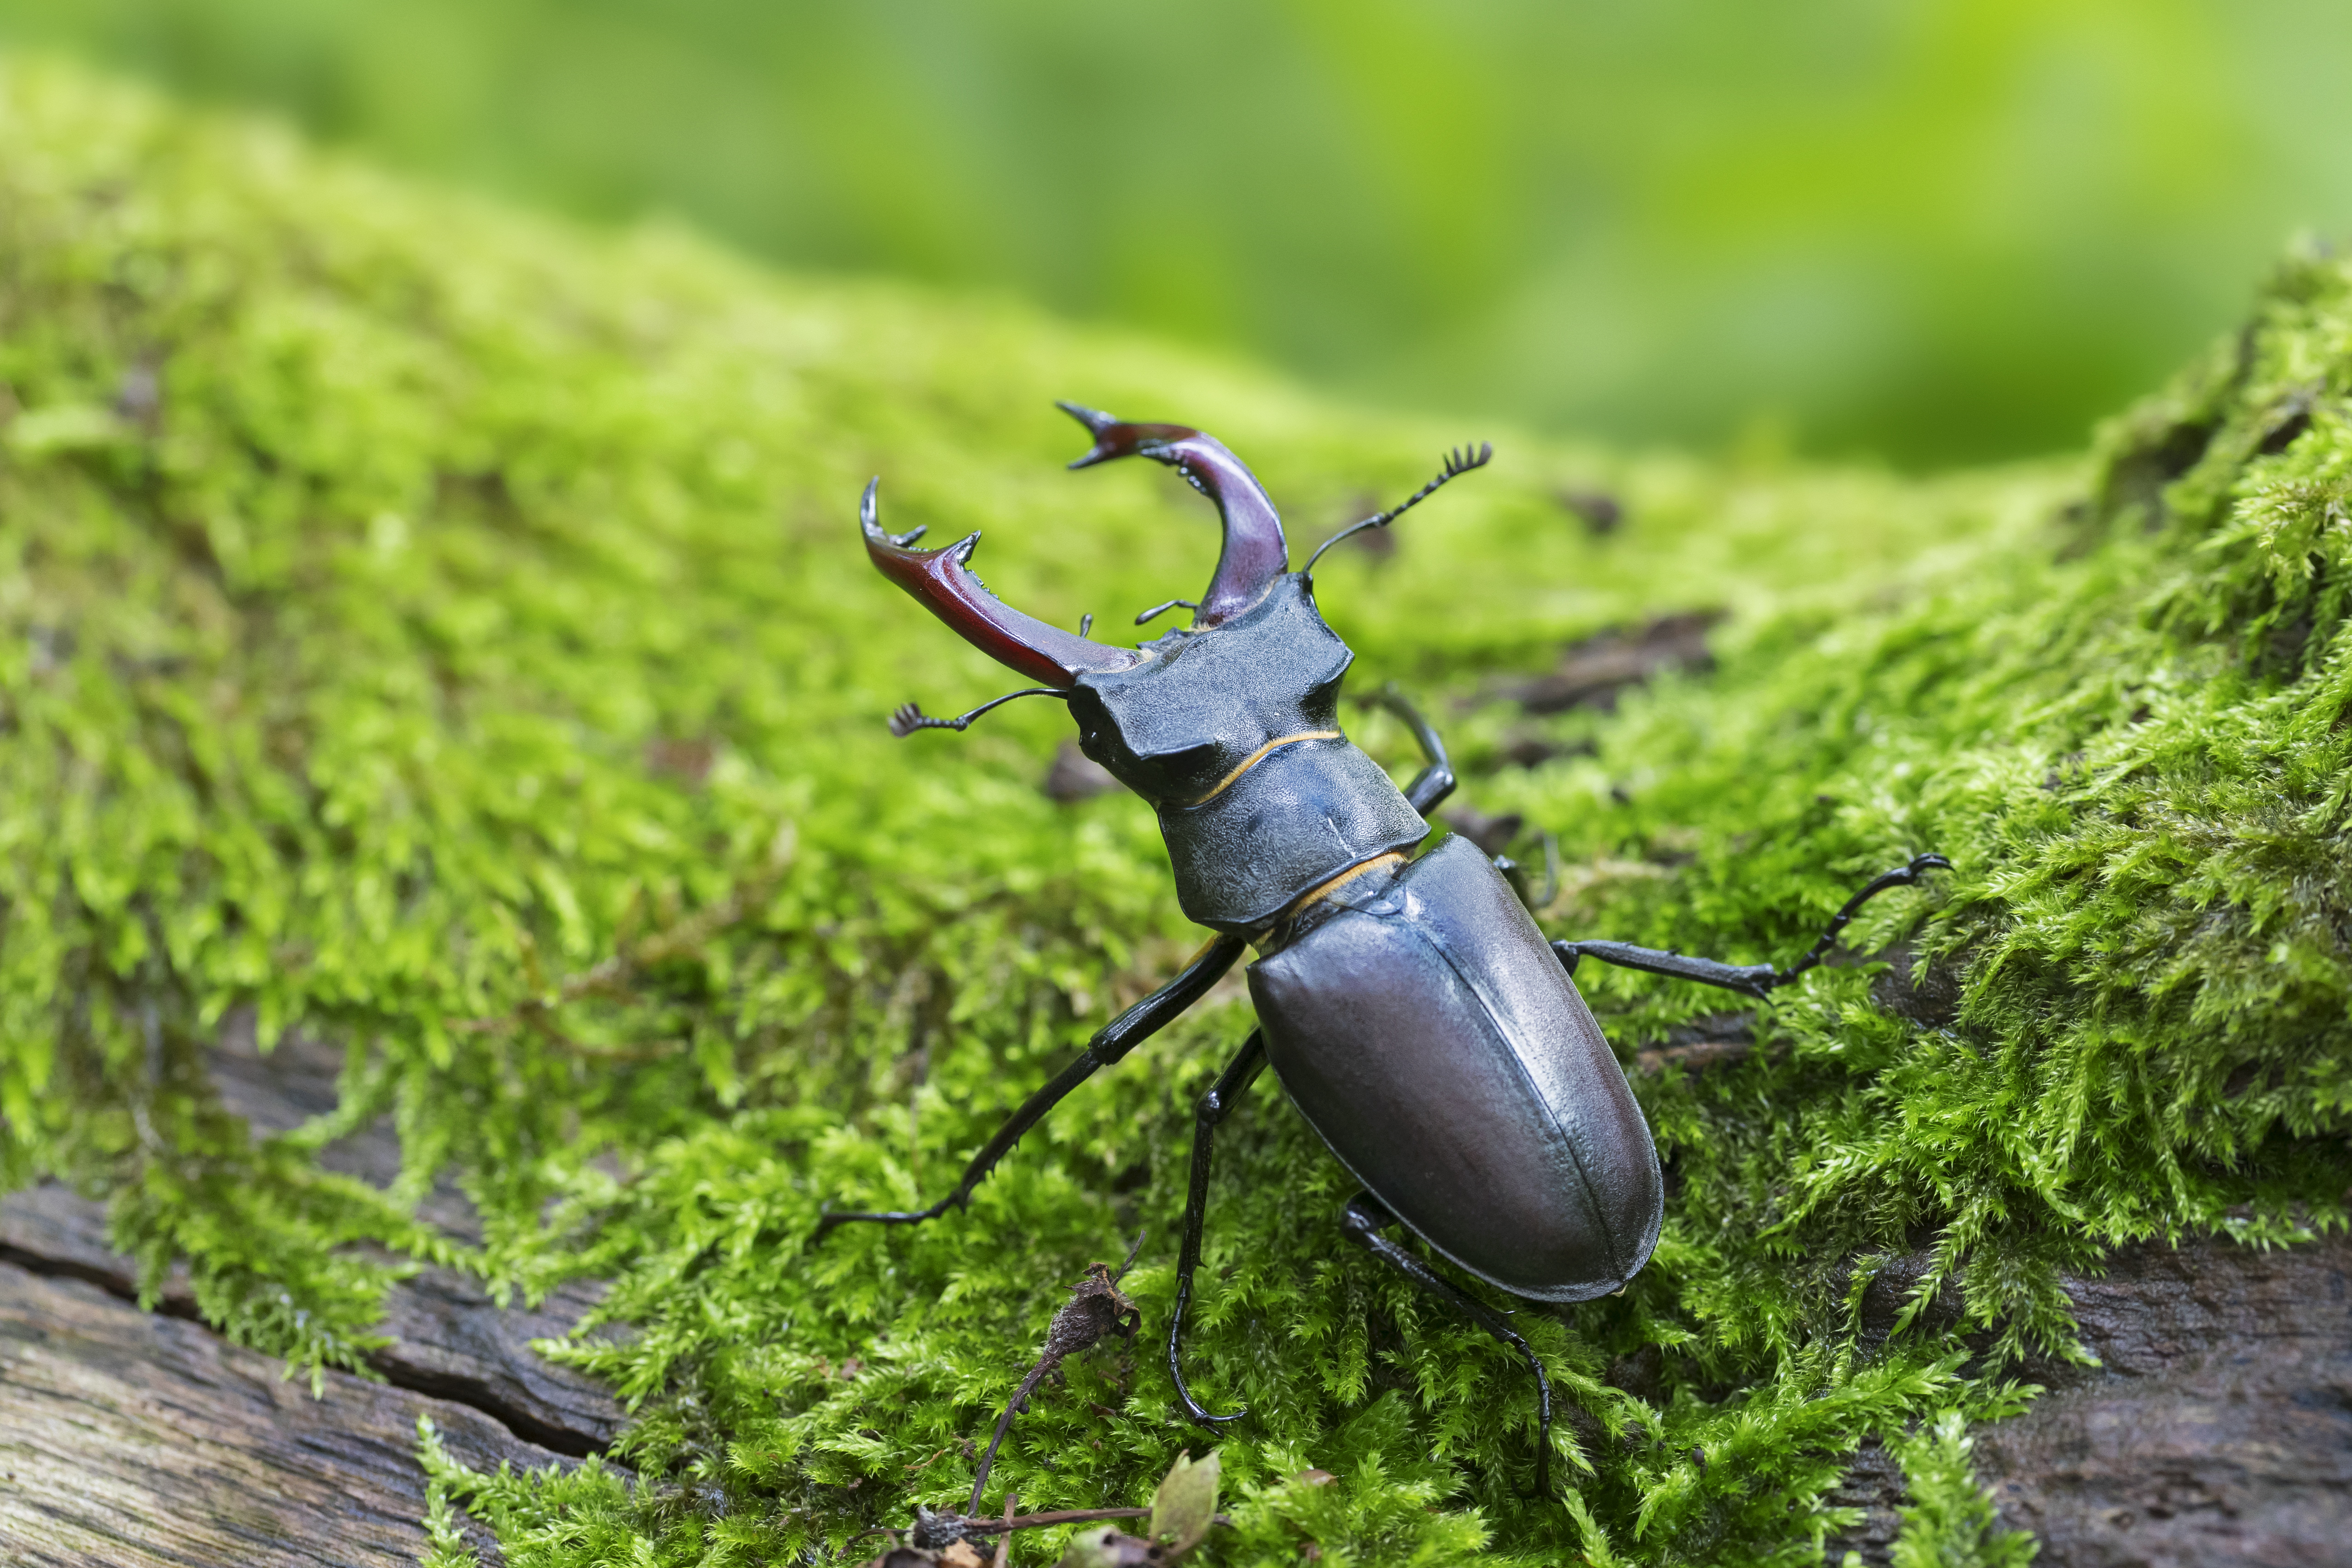 British beetle guide: where to see and how to identify these